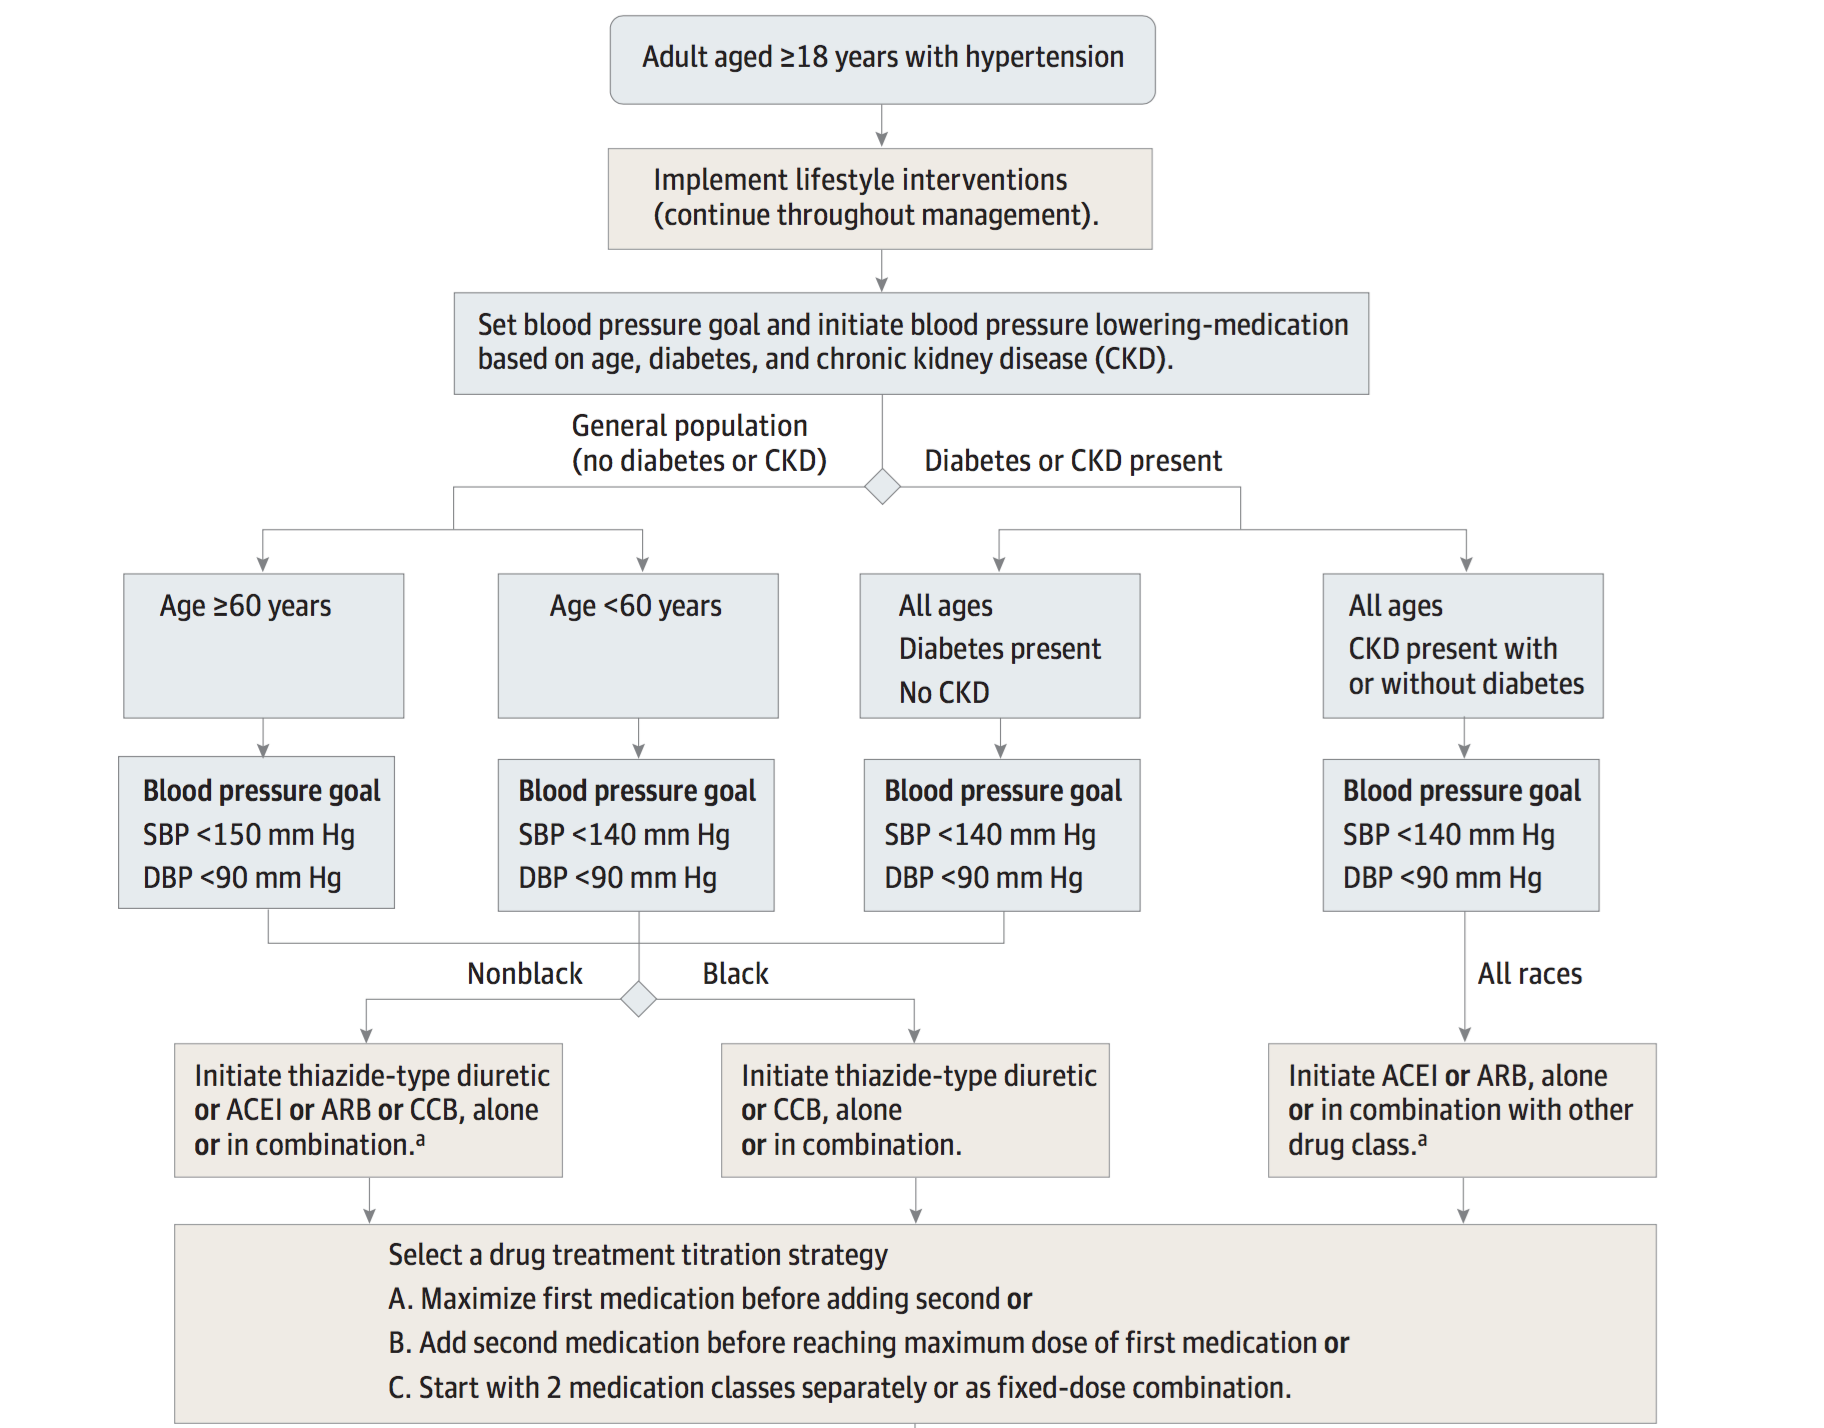 An overview of the JNC-8 guidelines helps characterize the general path utilized for treating patients (source)